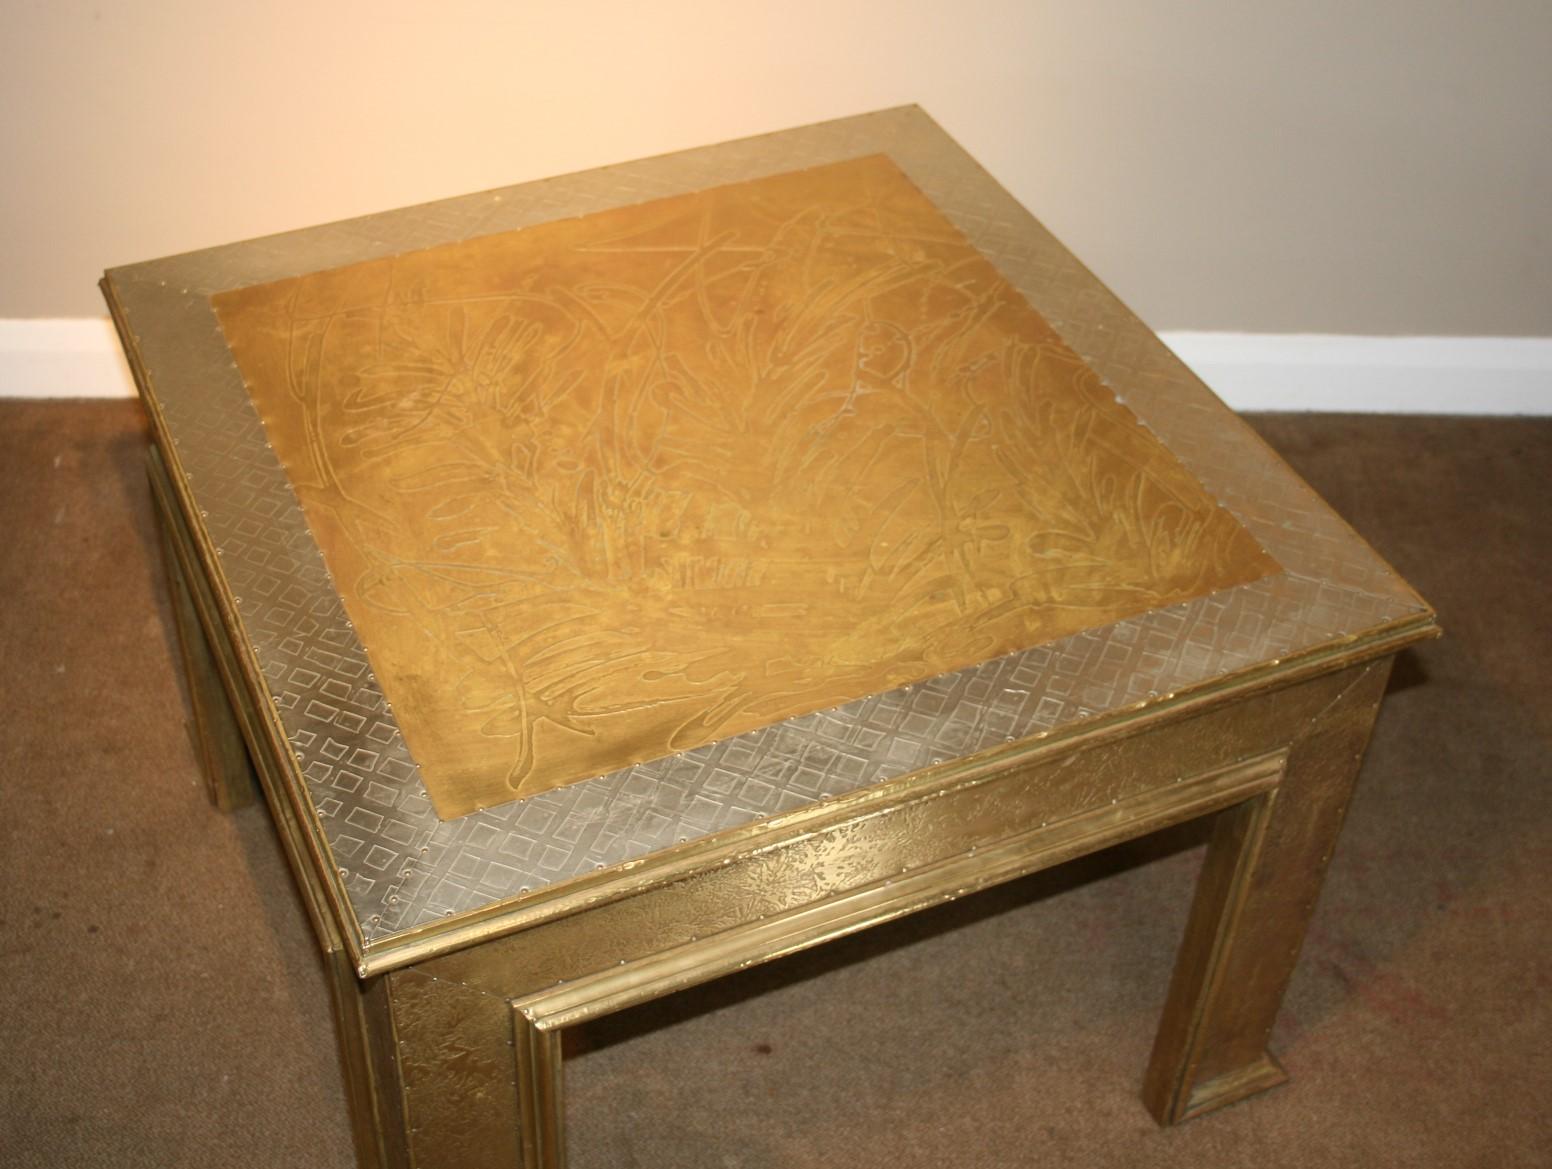 A stylish low etched Spanish coffee table in mixed metals. Designed and signed by Rudolfo Dubarry who settled in Marbella, Spain in the late 1960s.